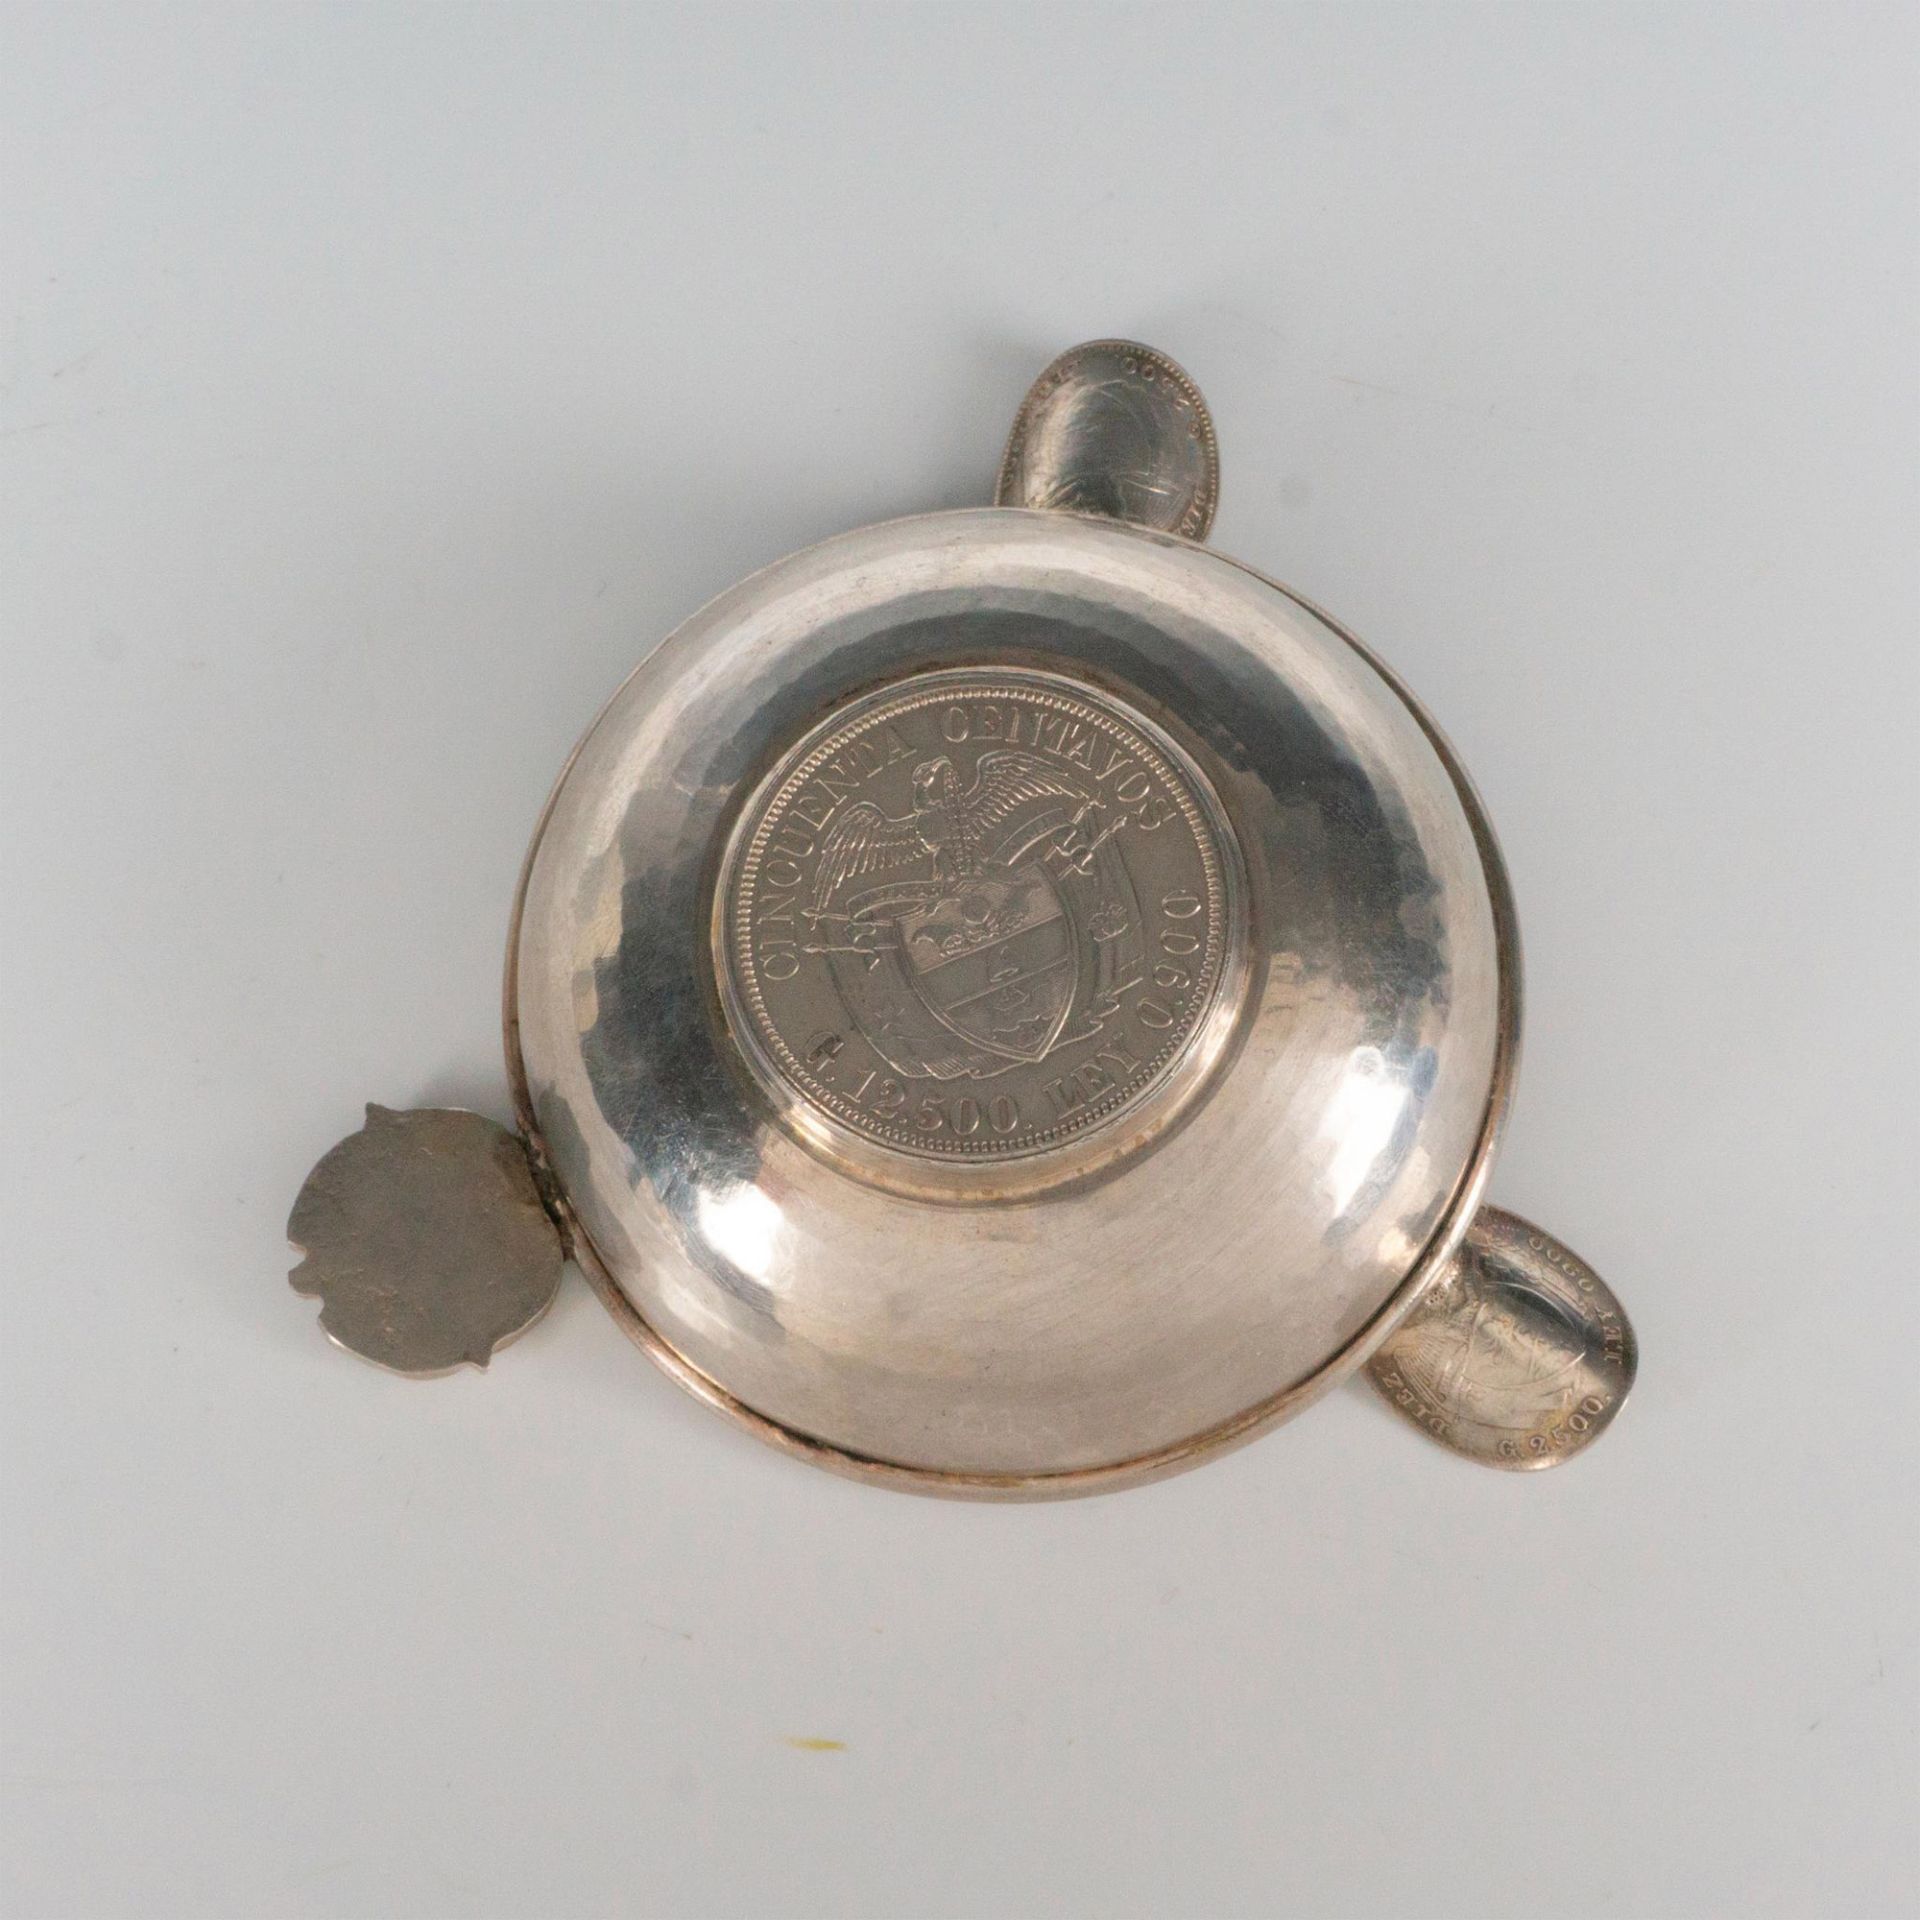 Antique Colombian Coin Silver Ashtray - Image 3 of 3